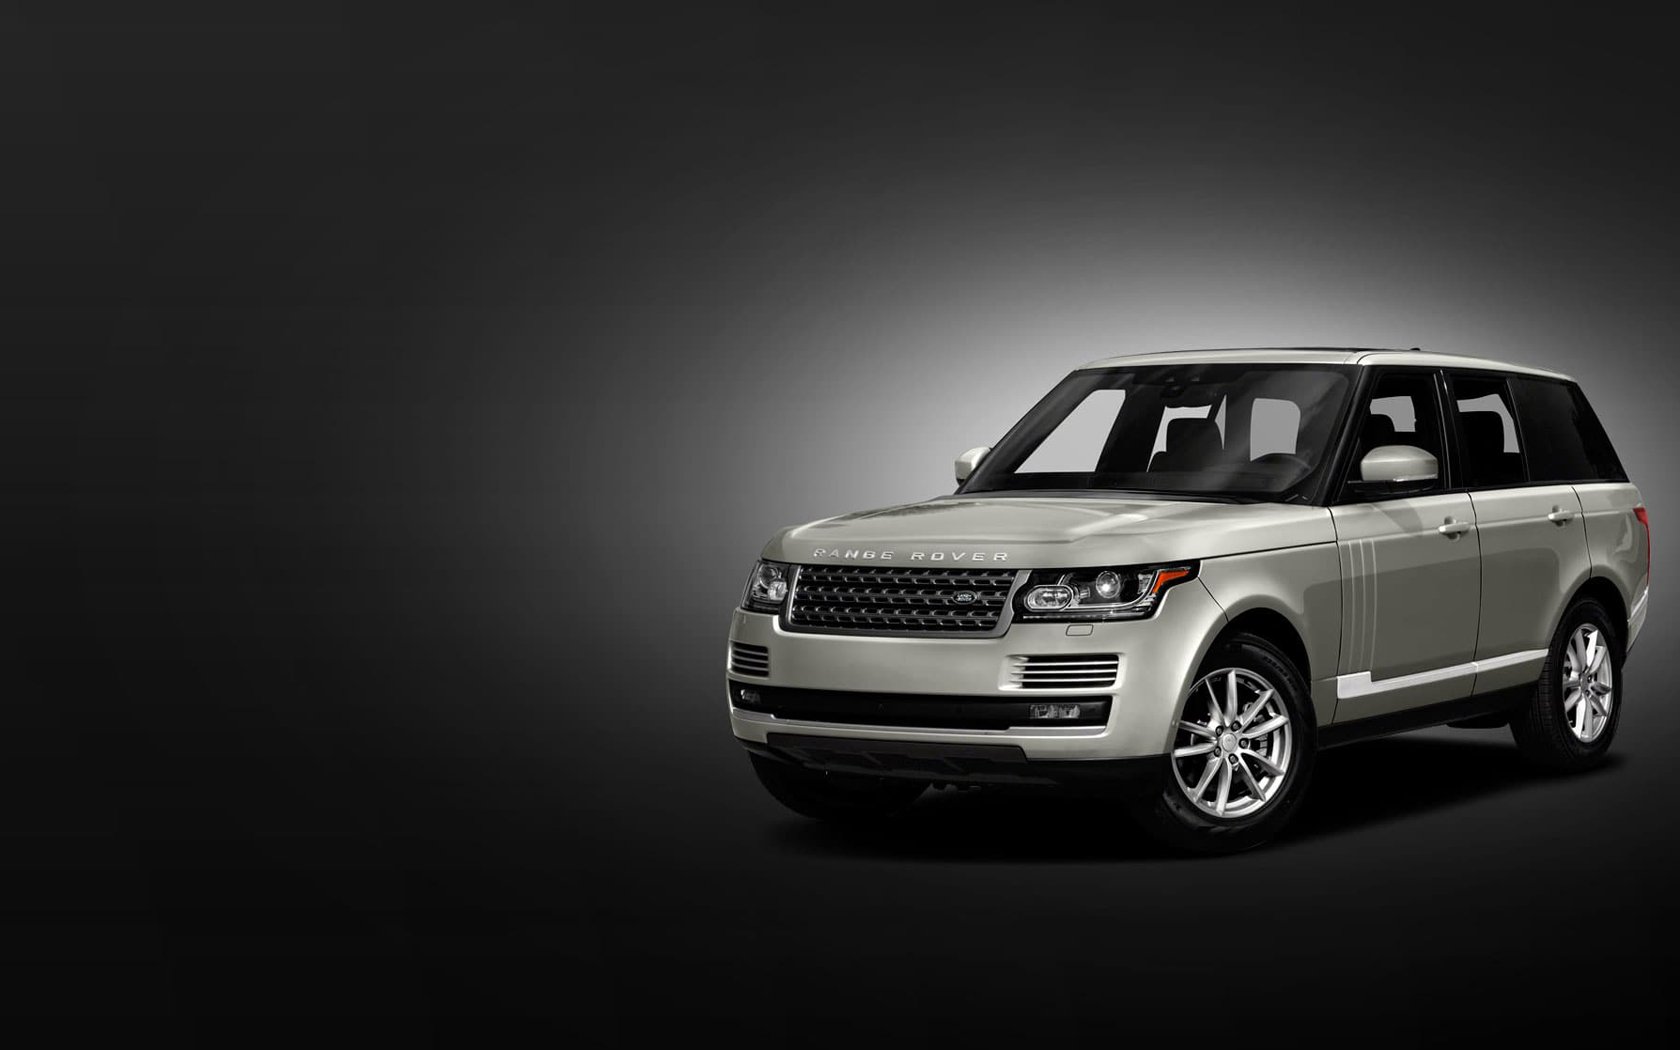 Range Rover  Certified Collision Repair Network<br />  First certified repair center in Orange County.